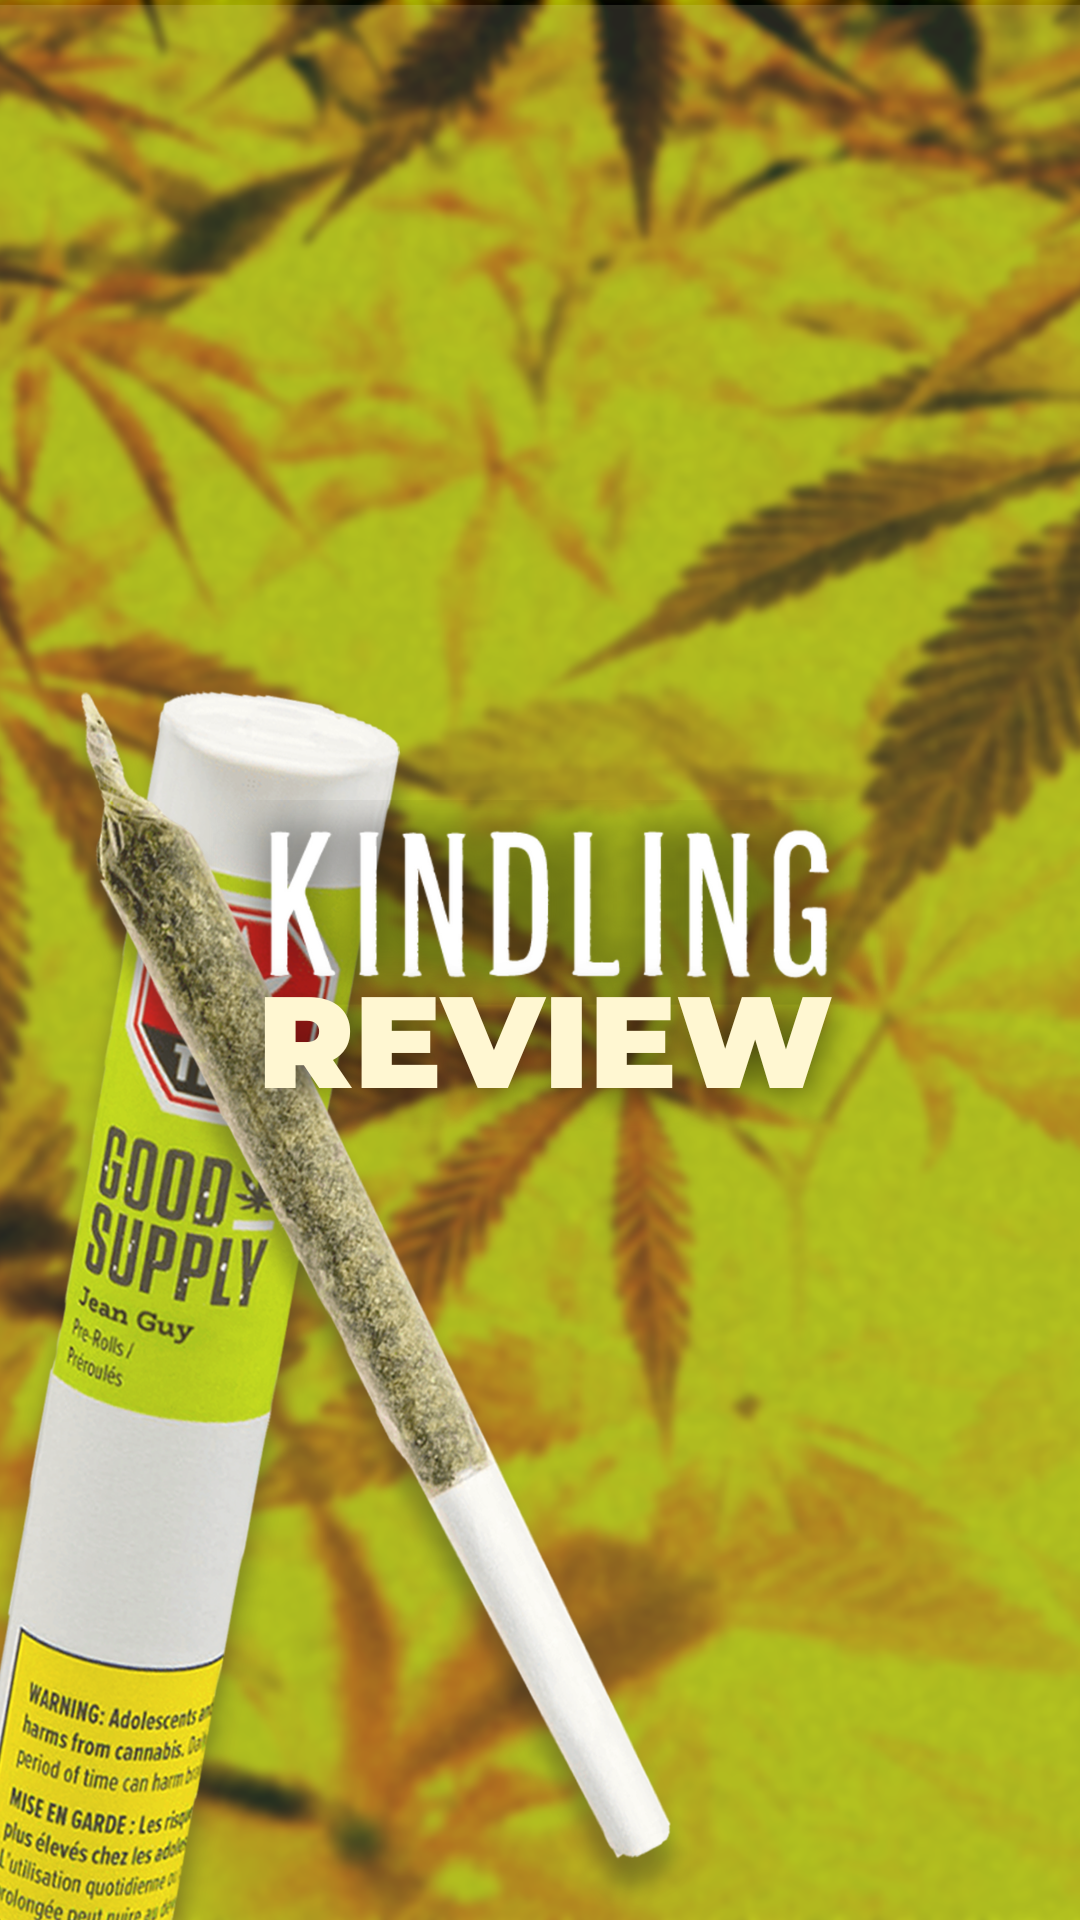 Review: Jean Guy Preroll 1 Gram by Good Supply